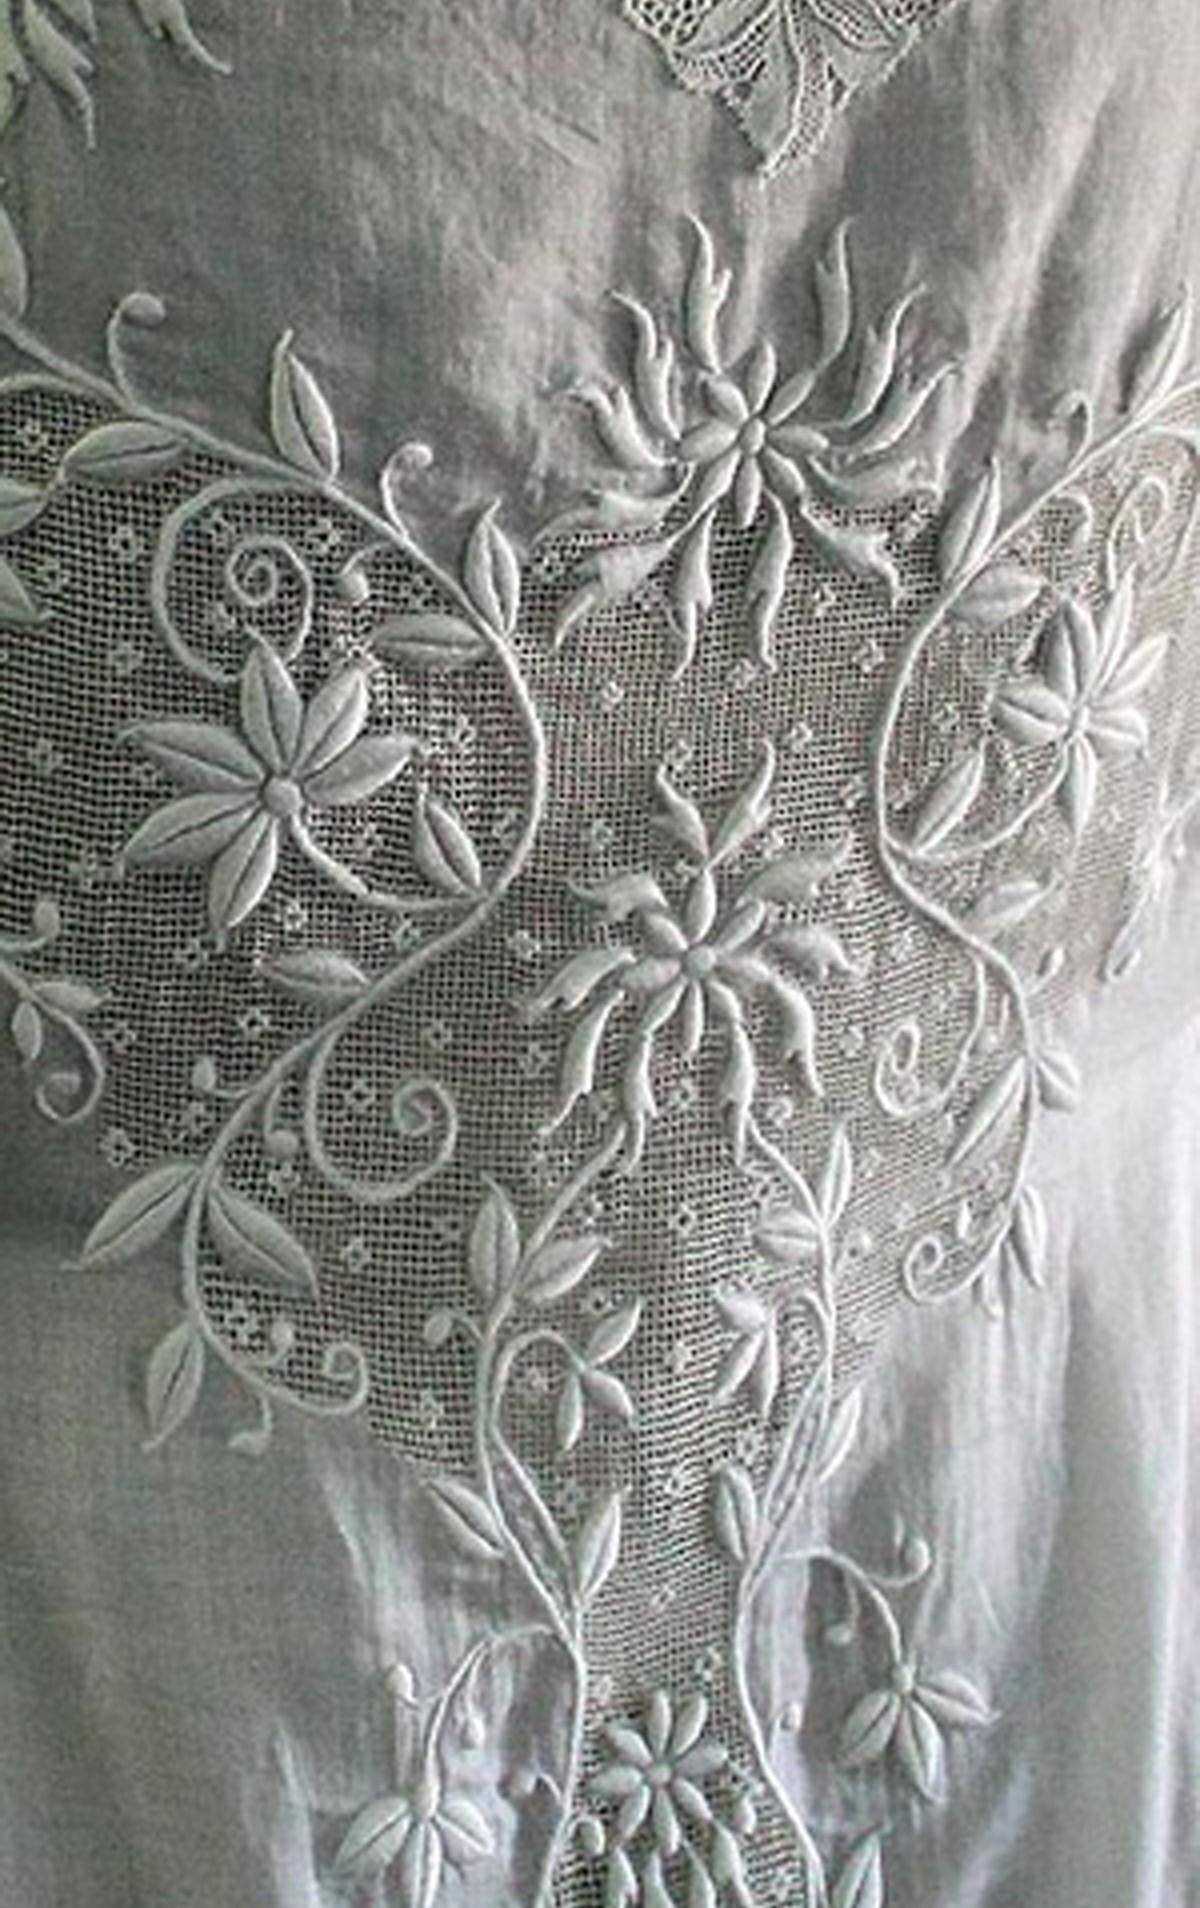 Vintage 1910's Edwardian White Embroidered Cotton Cut-Out Bridal ...